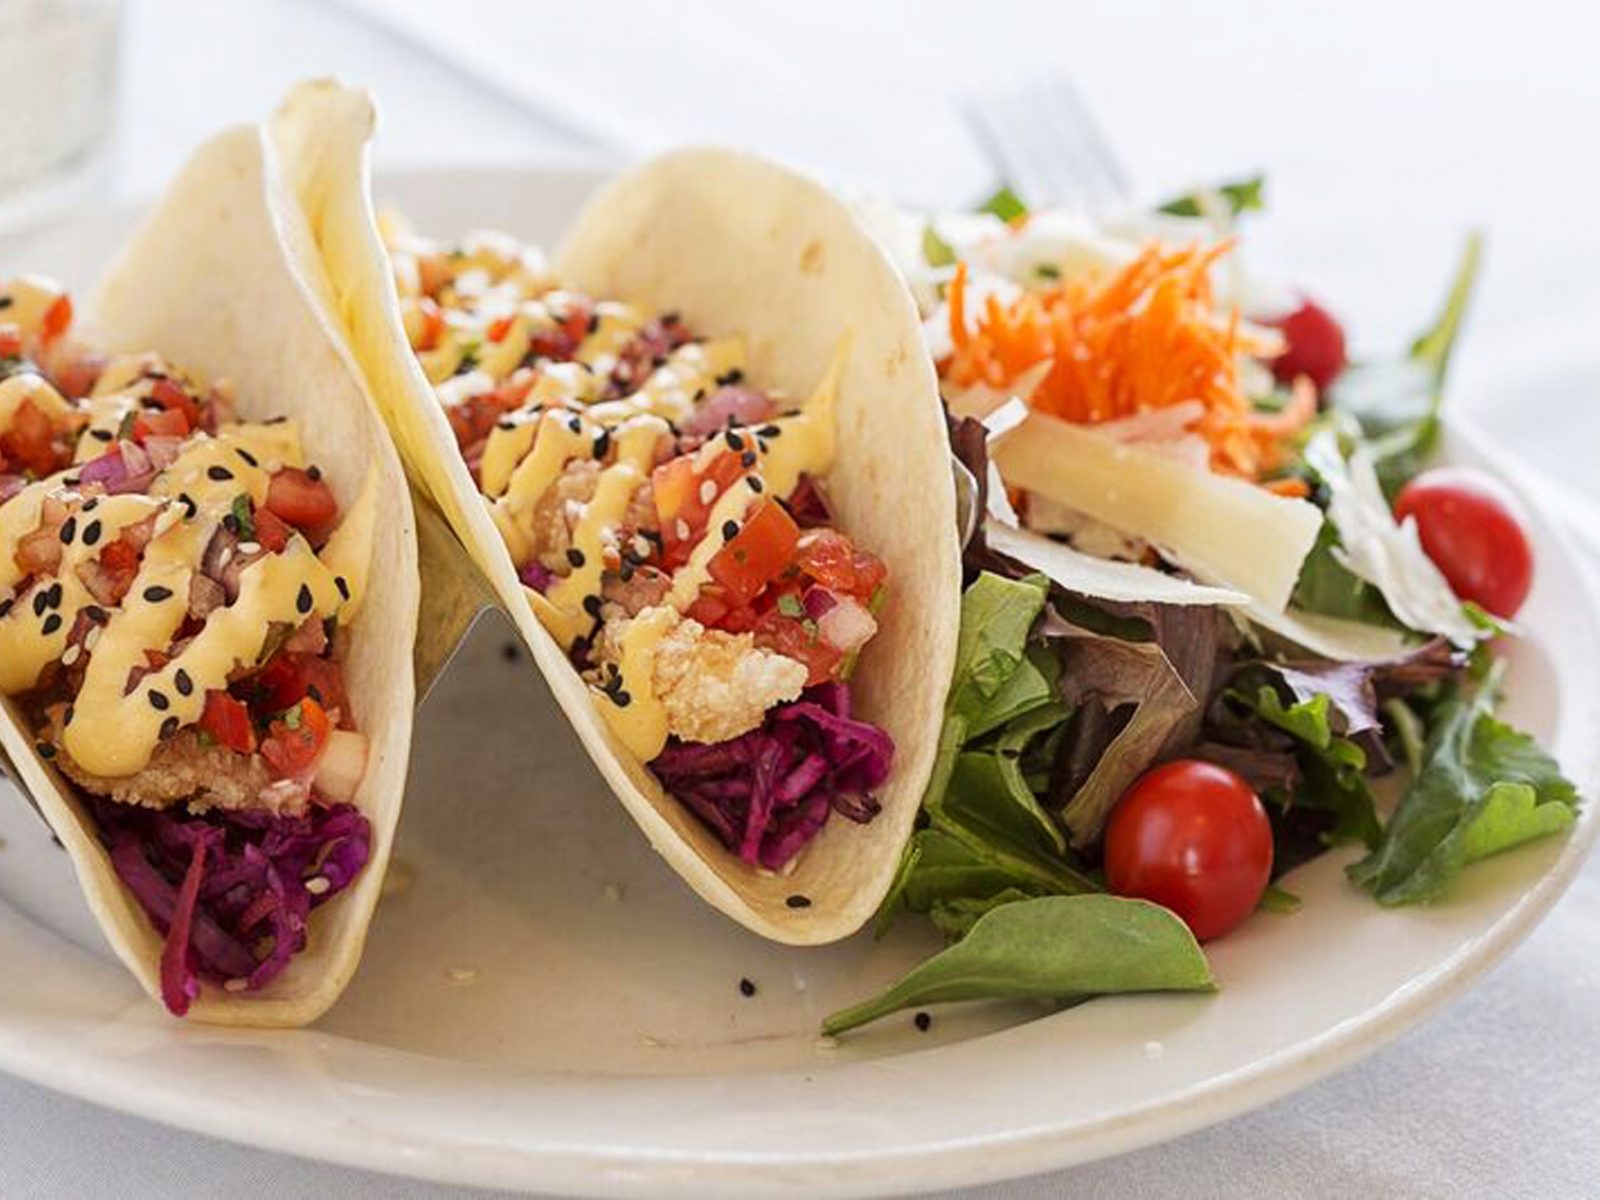 Tacos with mixed greens - Prepared by Robin’s Nest Mount Holly